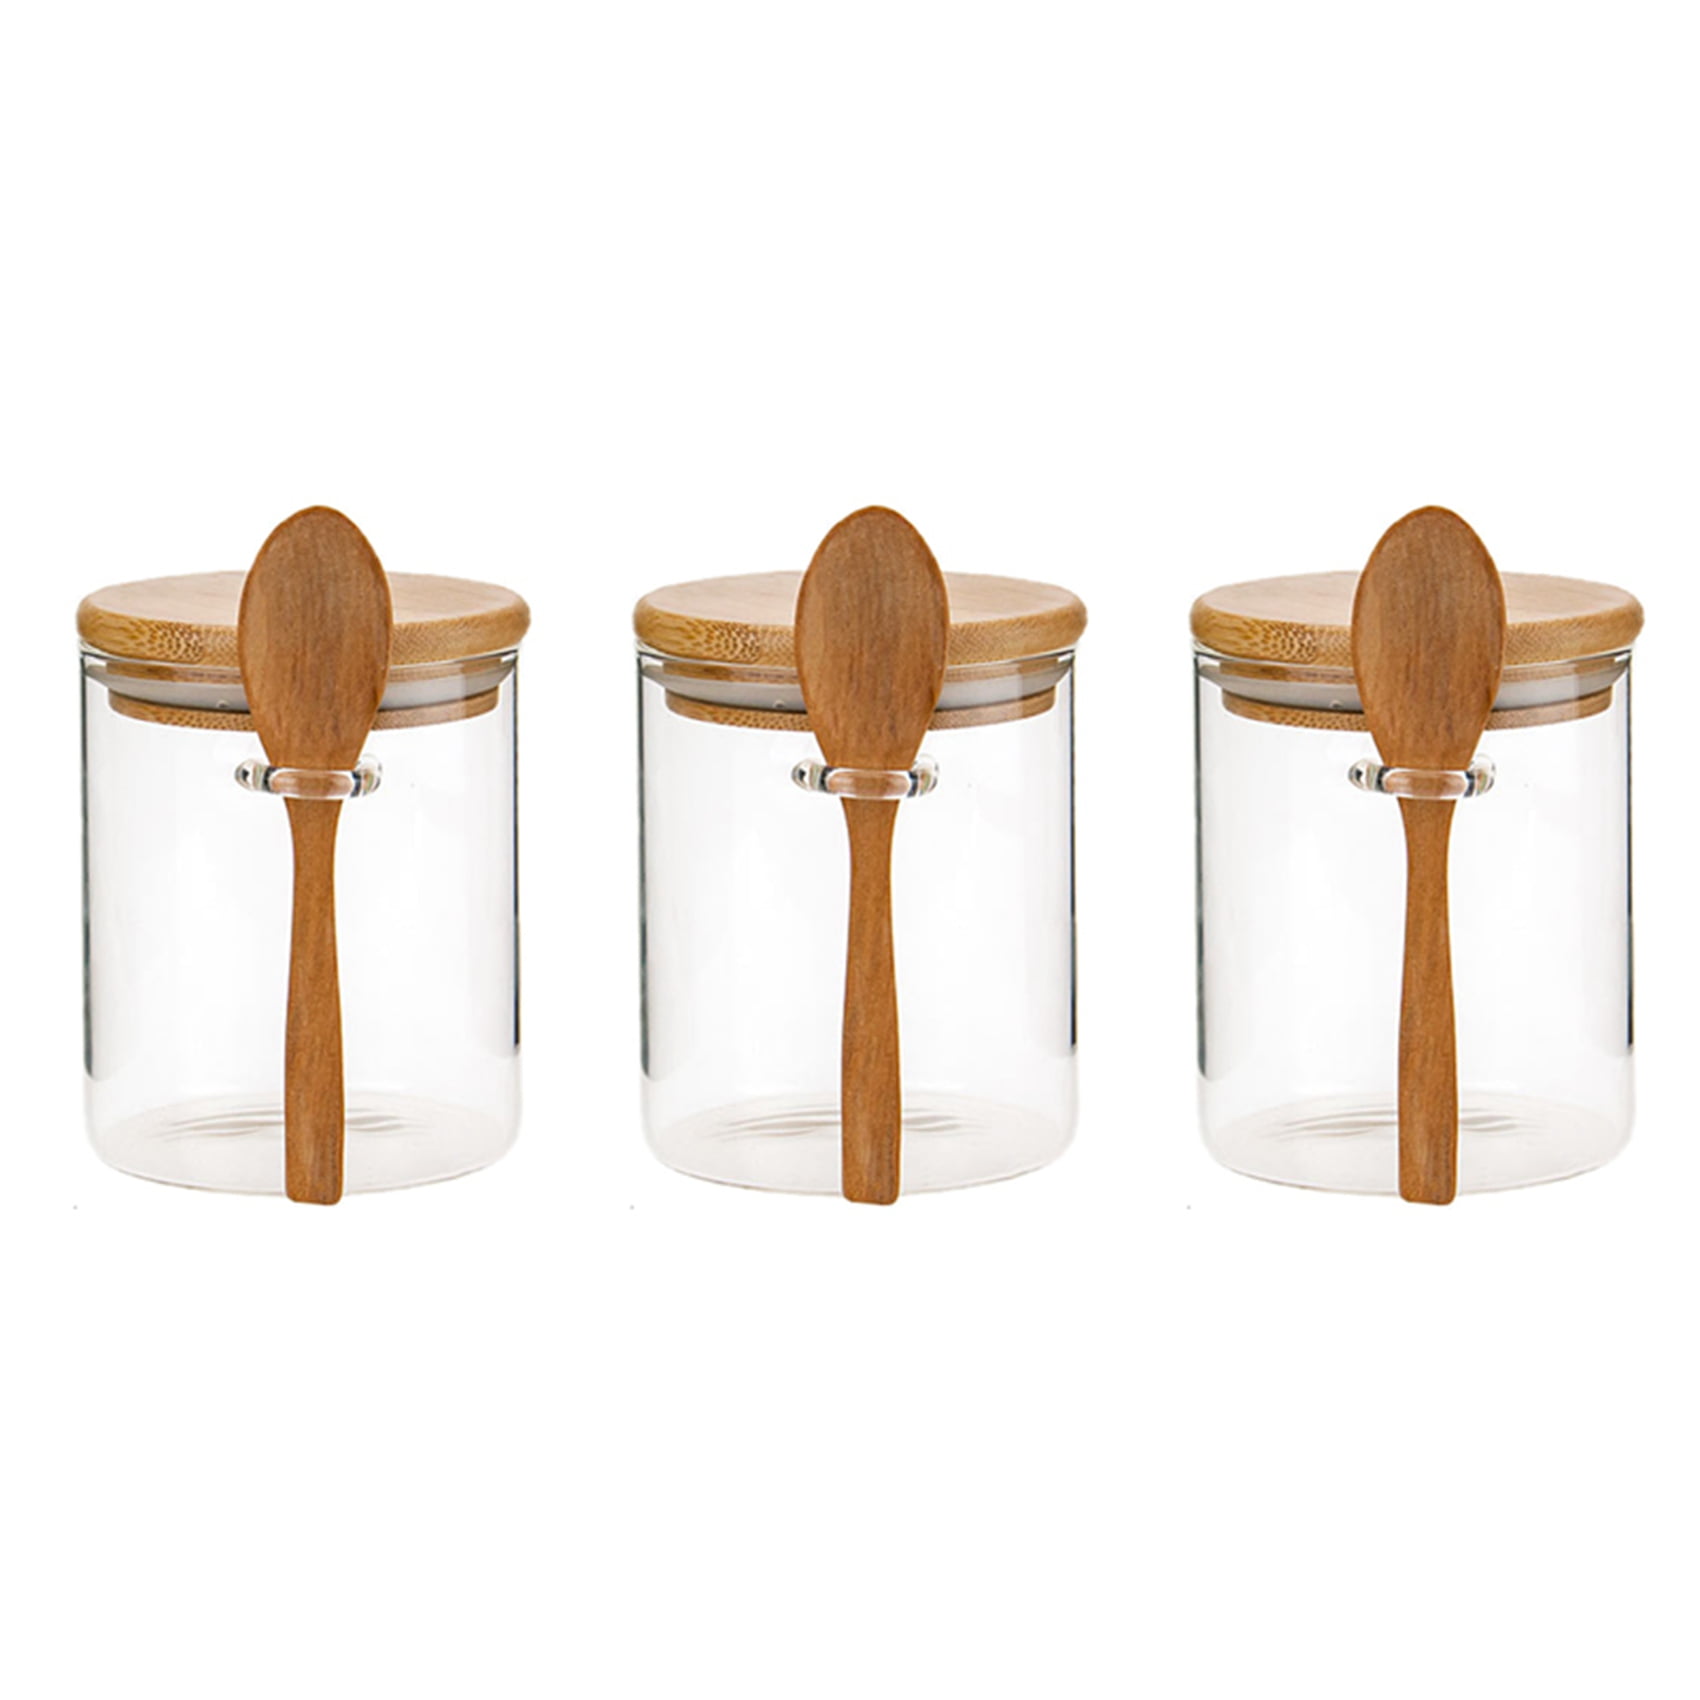 CLEAR rOund GLASS 8 oz JAR pear Wood Spoon wooden Cork Stopper Storage container 